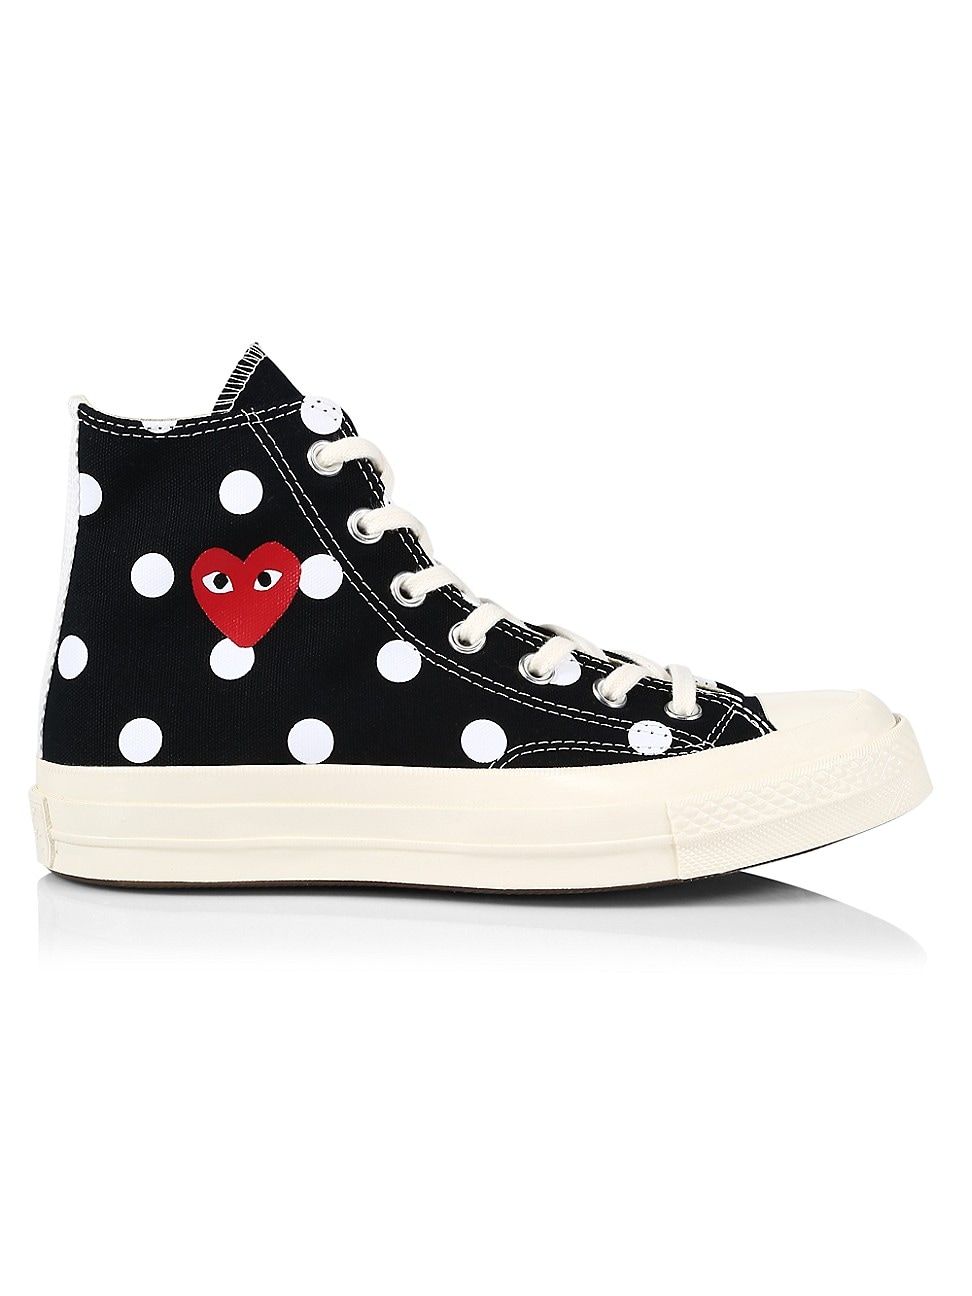 Women's Comme des Garcons Play x Converse Polka Dot High-Top Sneakers - Black - Size 7 | Saks Fifth Avenue